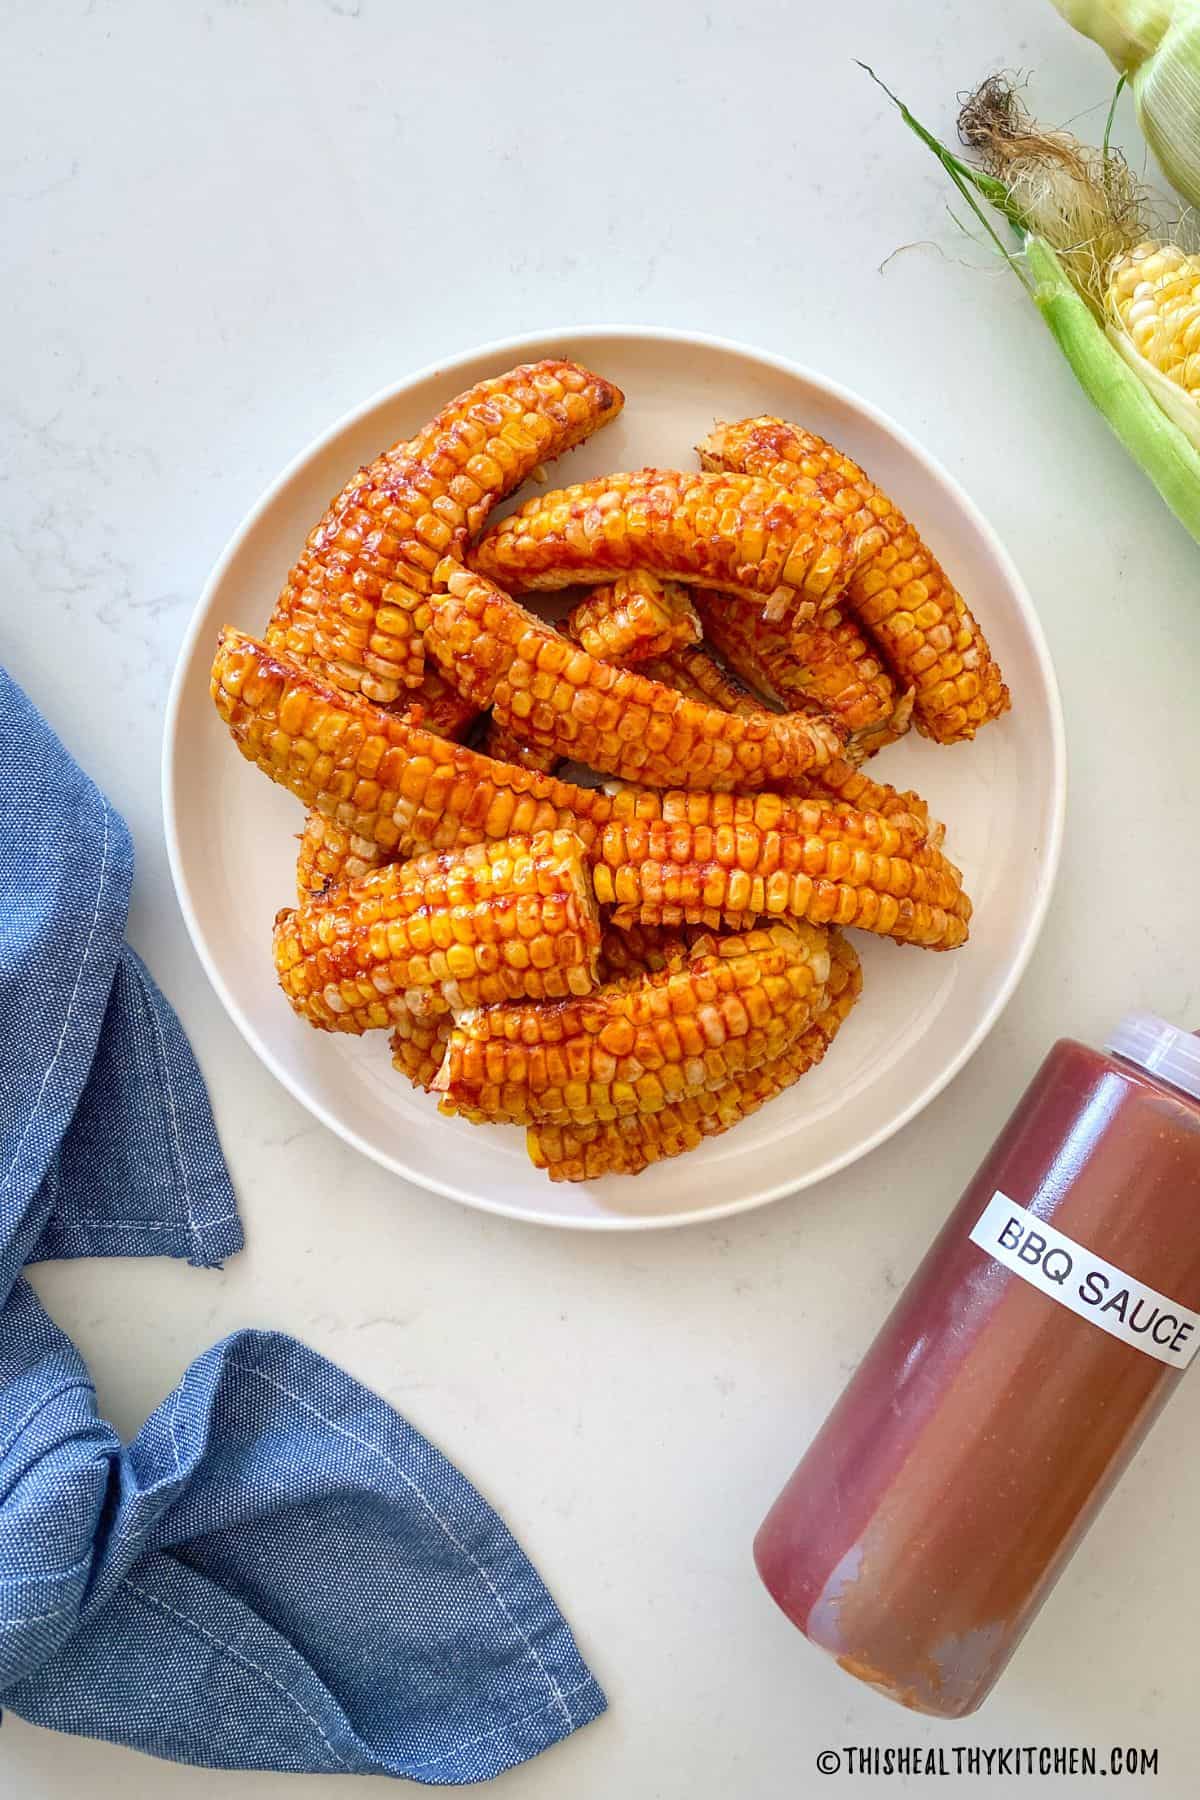 BBQ sauce covered corn on white plate with bottle of bbq sauce beside it.